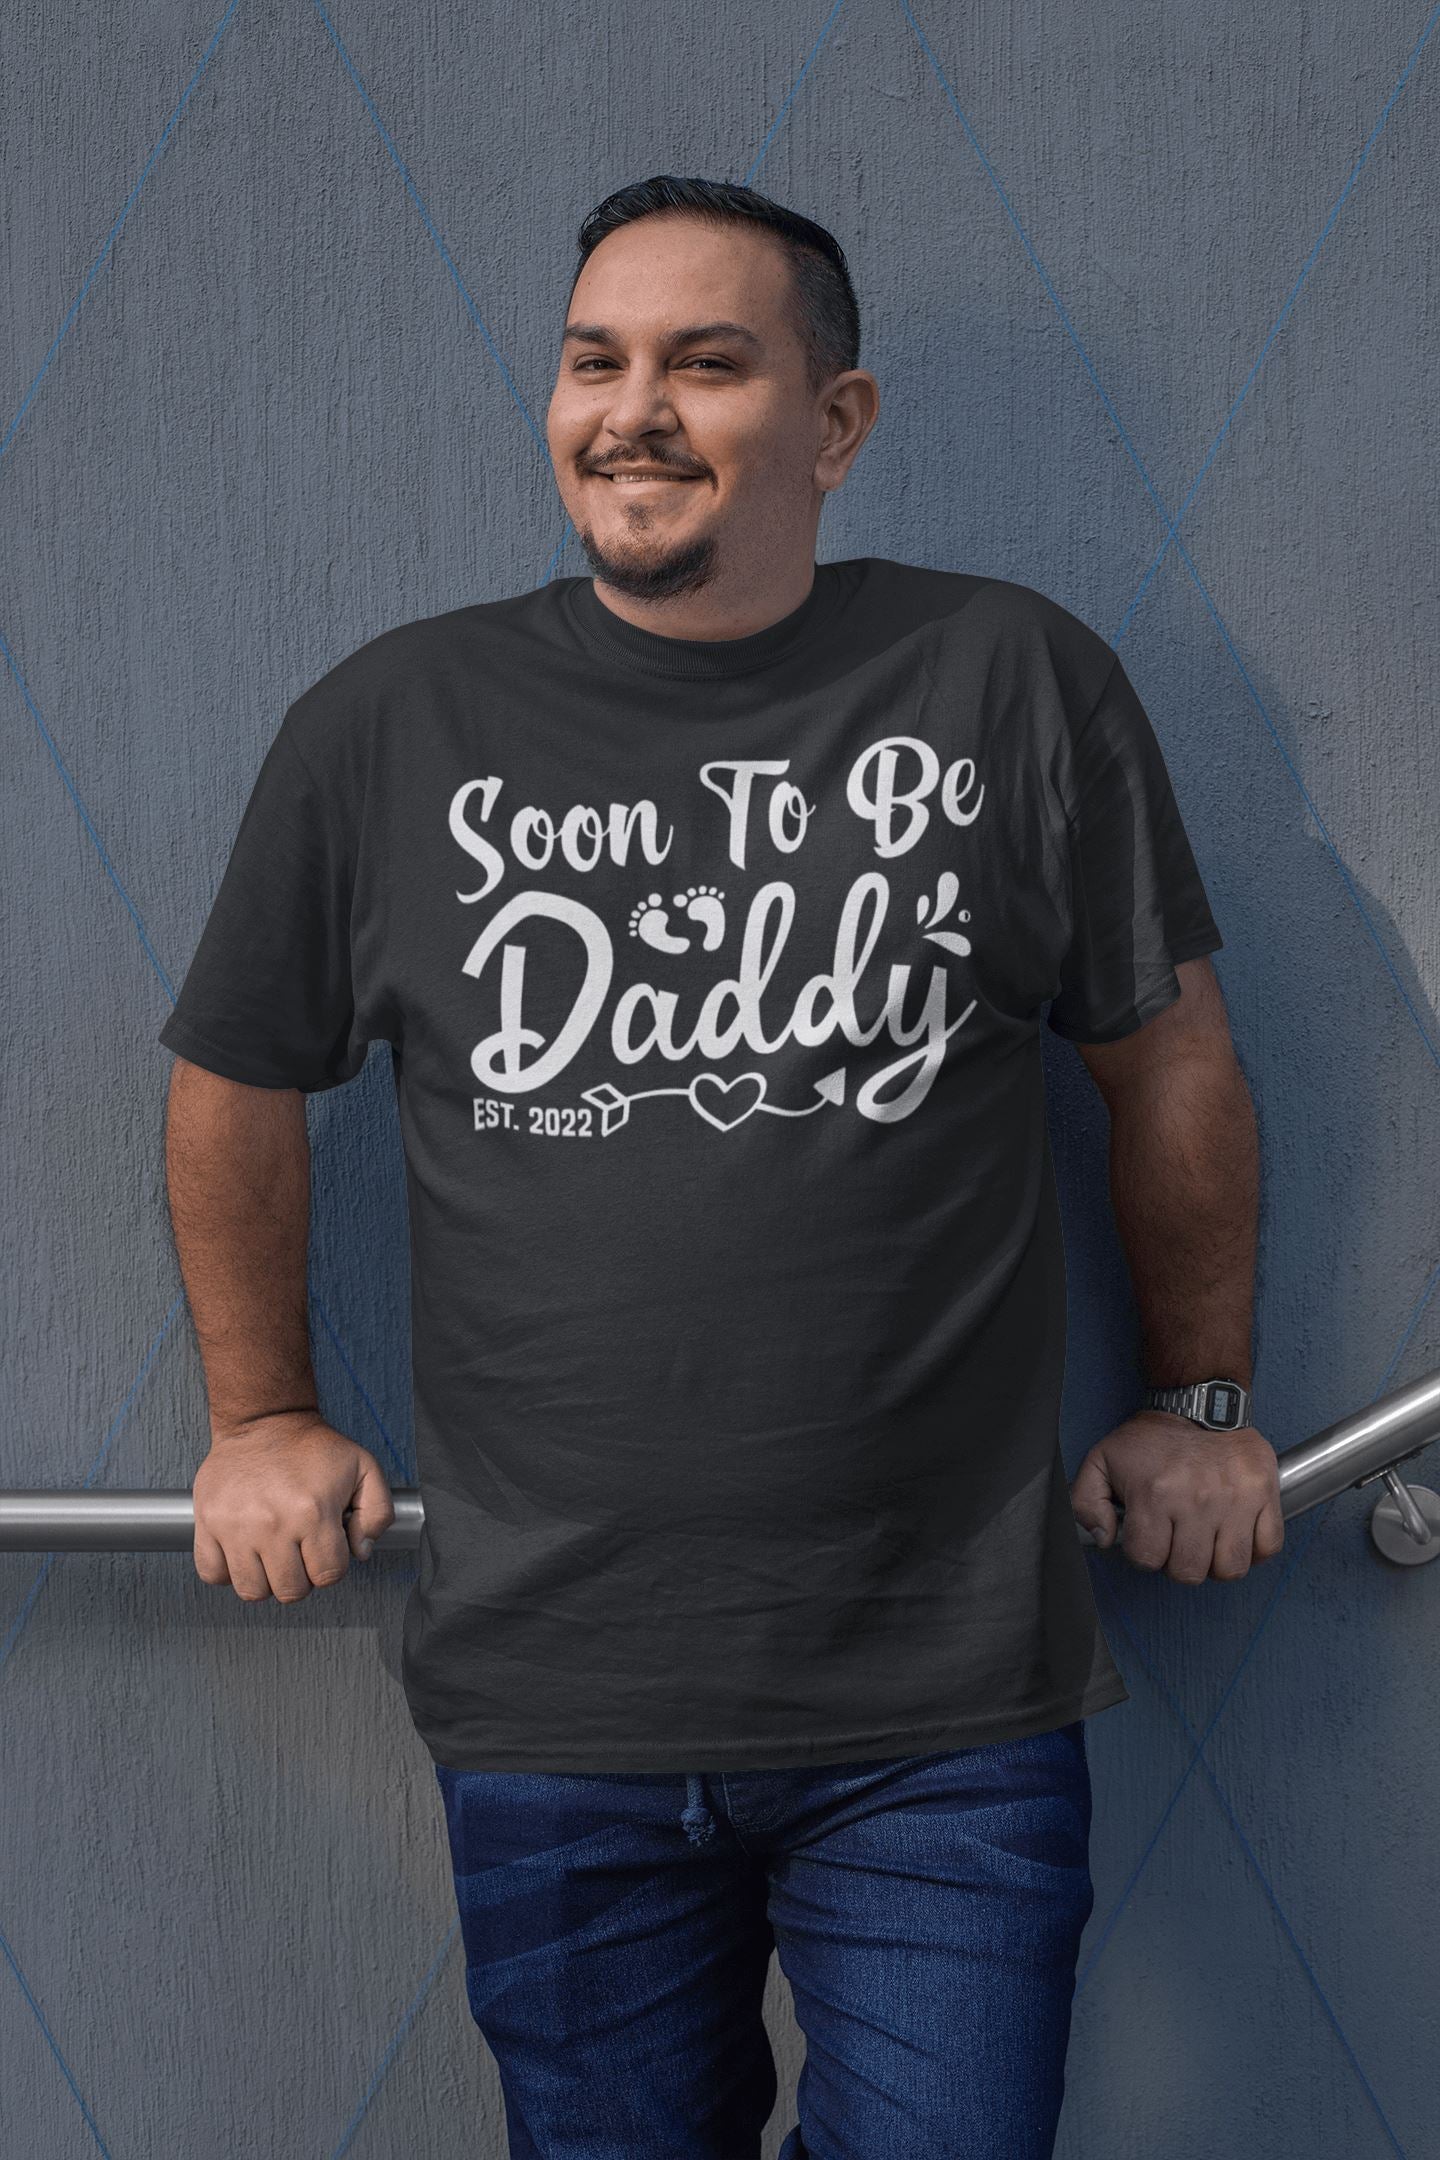 Soon To Be Daddy Est. 2022 Exclusive Black T Shirt for Men - Catch My Drift India Clothing black, clothing, dad, expecting father, father, made in india, parents, shirt, t shirt, tshirt